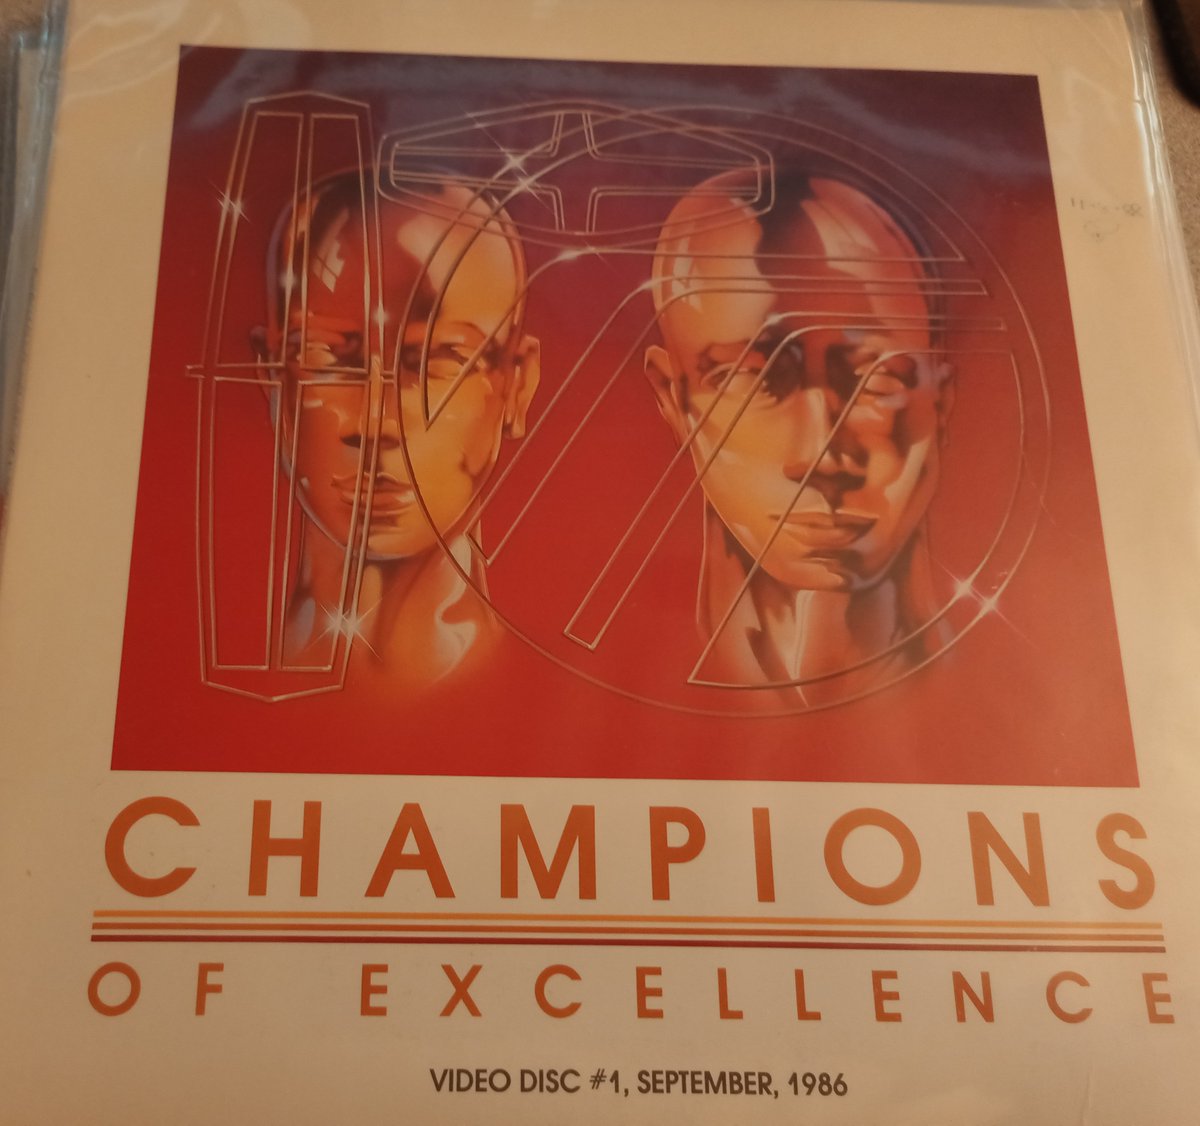 Another ford Champions of Excellence disc, this is the first one, from September 1986, no title.